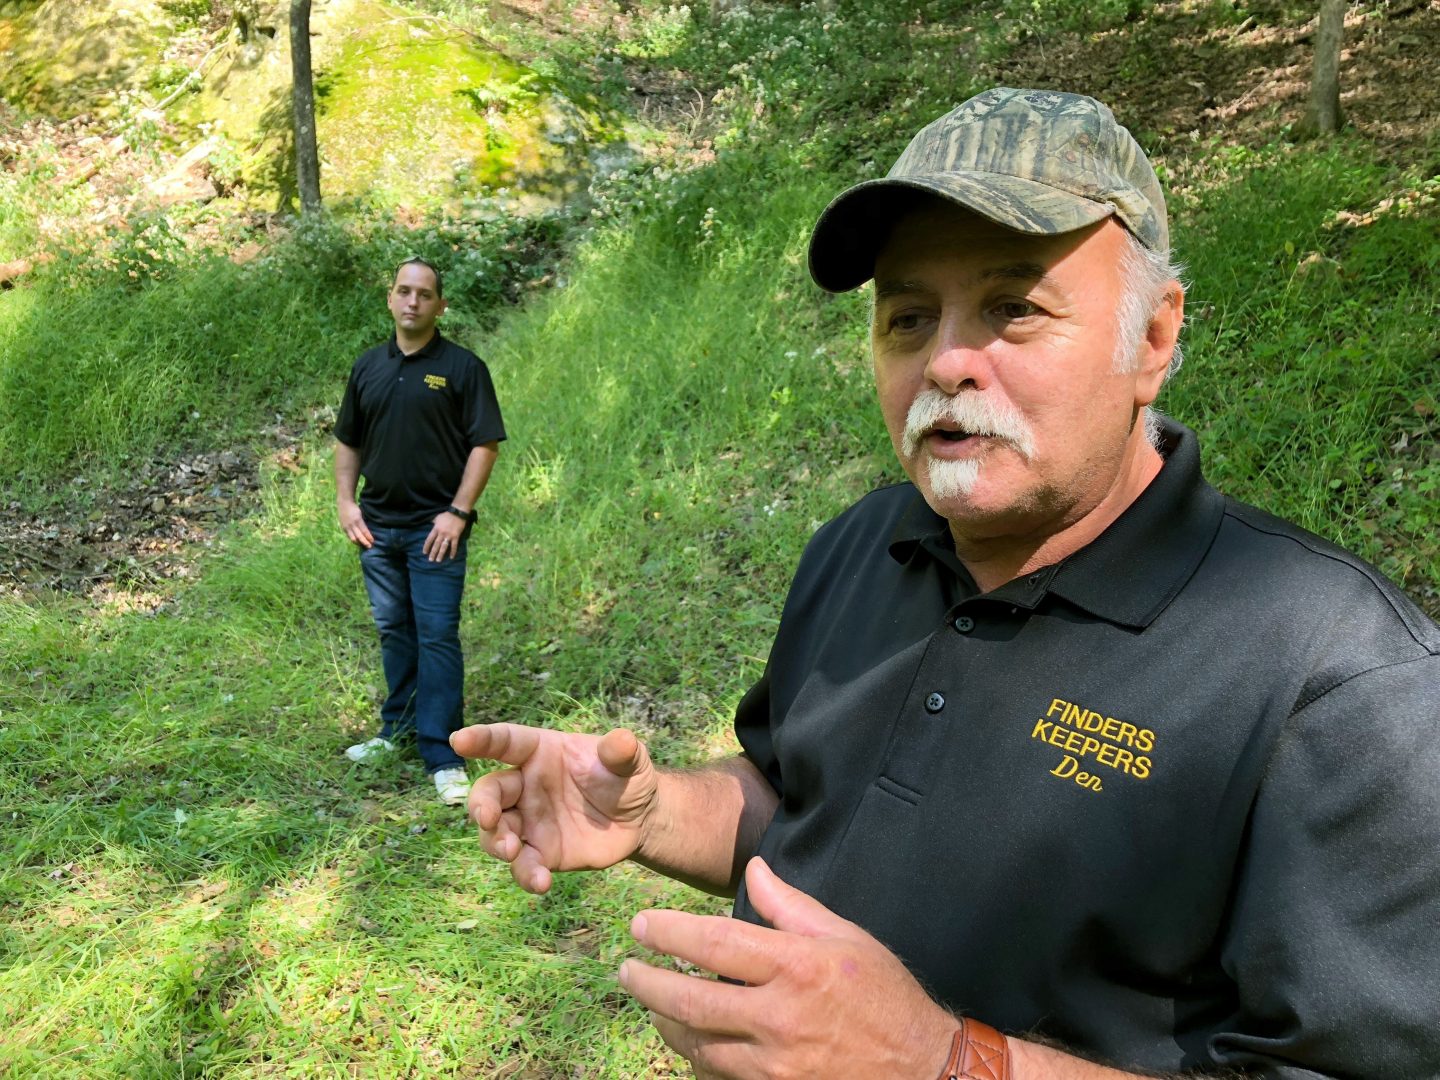 In this Sept. 20, 2018 photo, Dennis Parada, right, and his son Kem Parada stand at the site of the FBI's dig for Civil War-era gold in Dents Run, Pennsylvania. On Thursday, Oct. 24, 2019 an appeals court ordered Pennsylvania state officials to produce their communications with the FBI about the excavation, which was conducted on state-owned land. The state Department of Conservation and Natural Resources had refused to provide the documents to Finders Keepers, citing a federal court order.